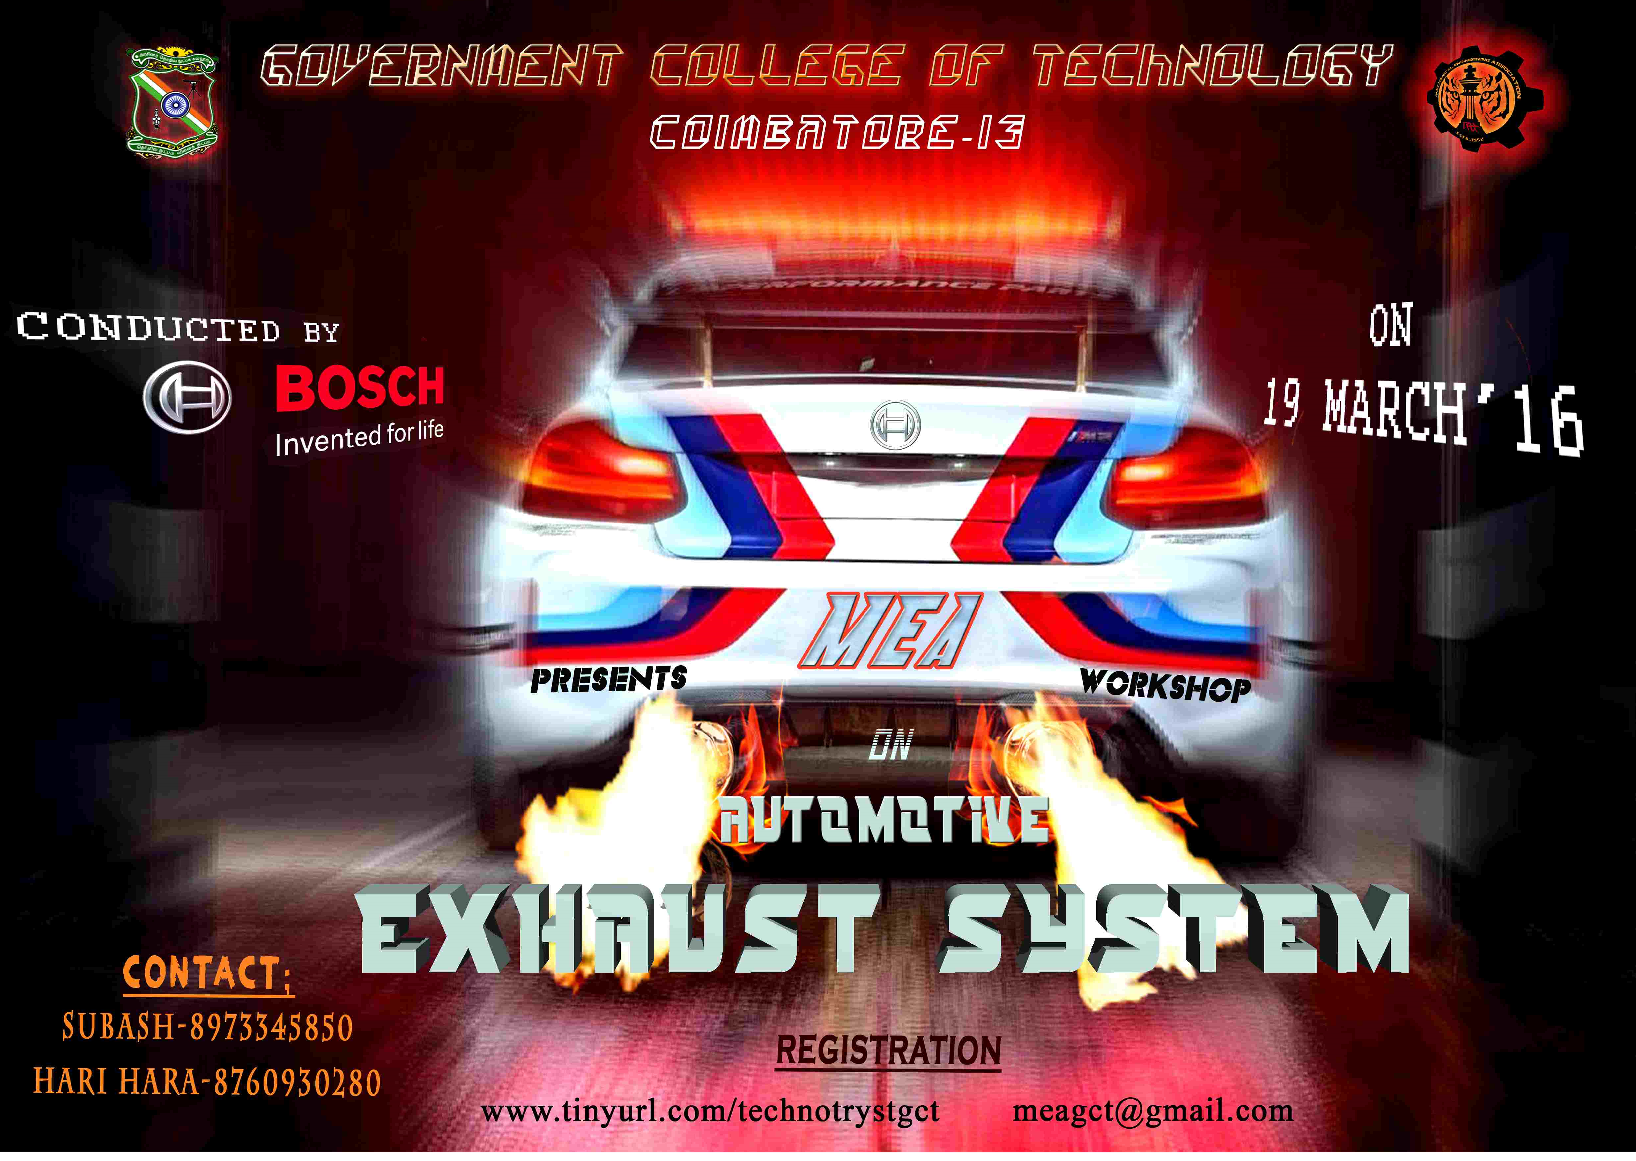 Workshop On Automotive Exhaust System And Calibration